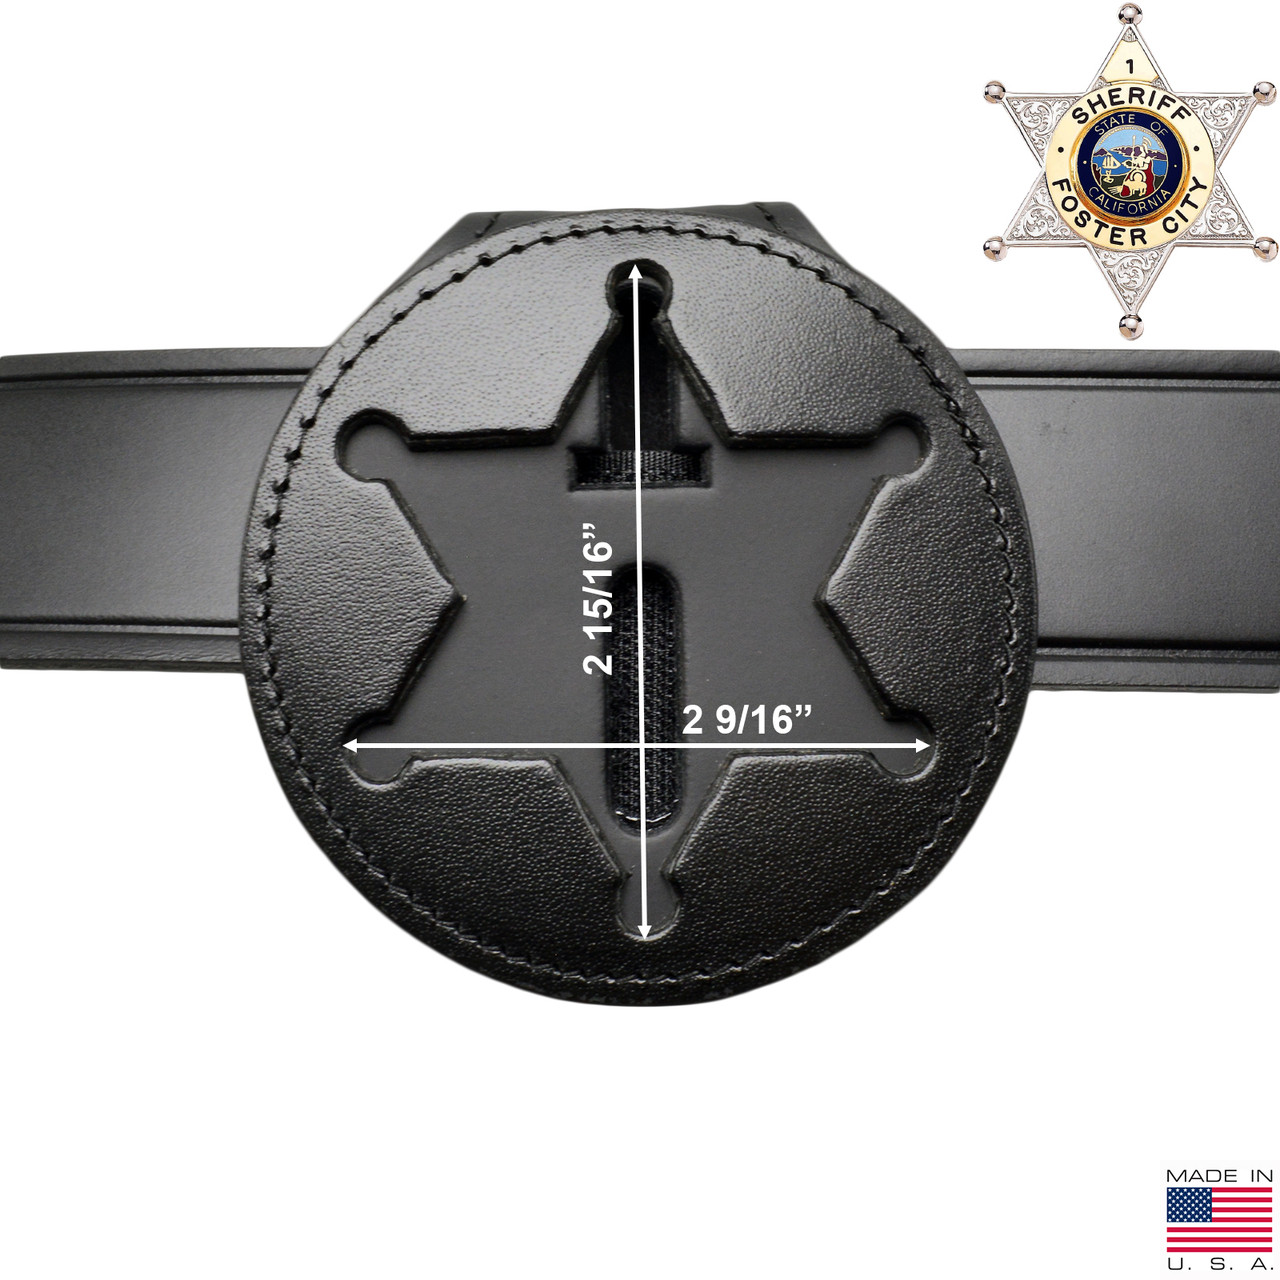 Deputy Sheriff Badge Retractable ID Card Holder Badge Reel (Silver) (badge Style: 6 Point Star)